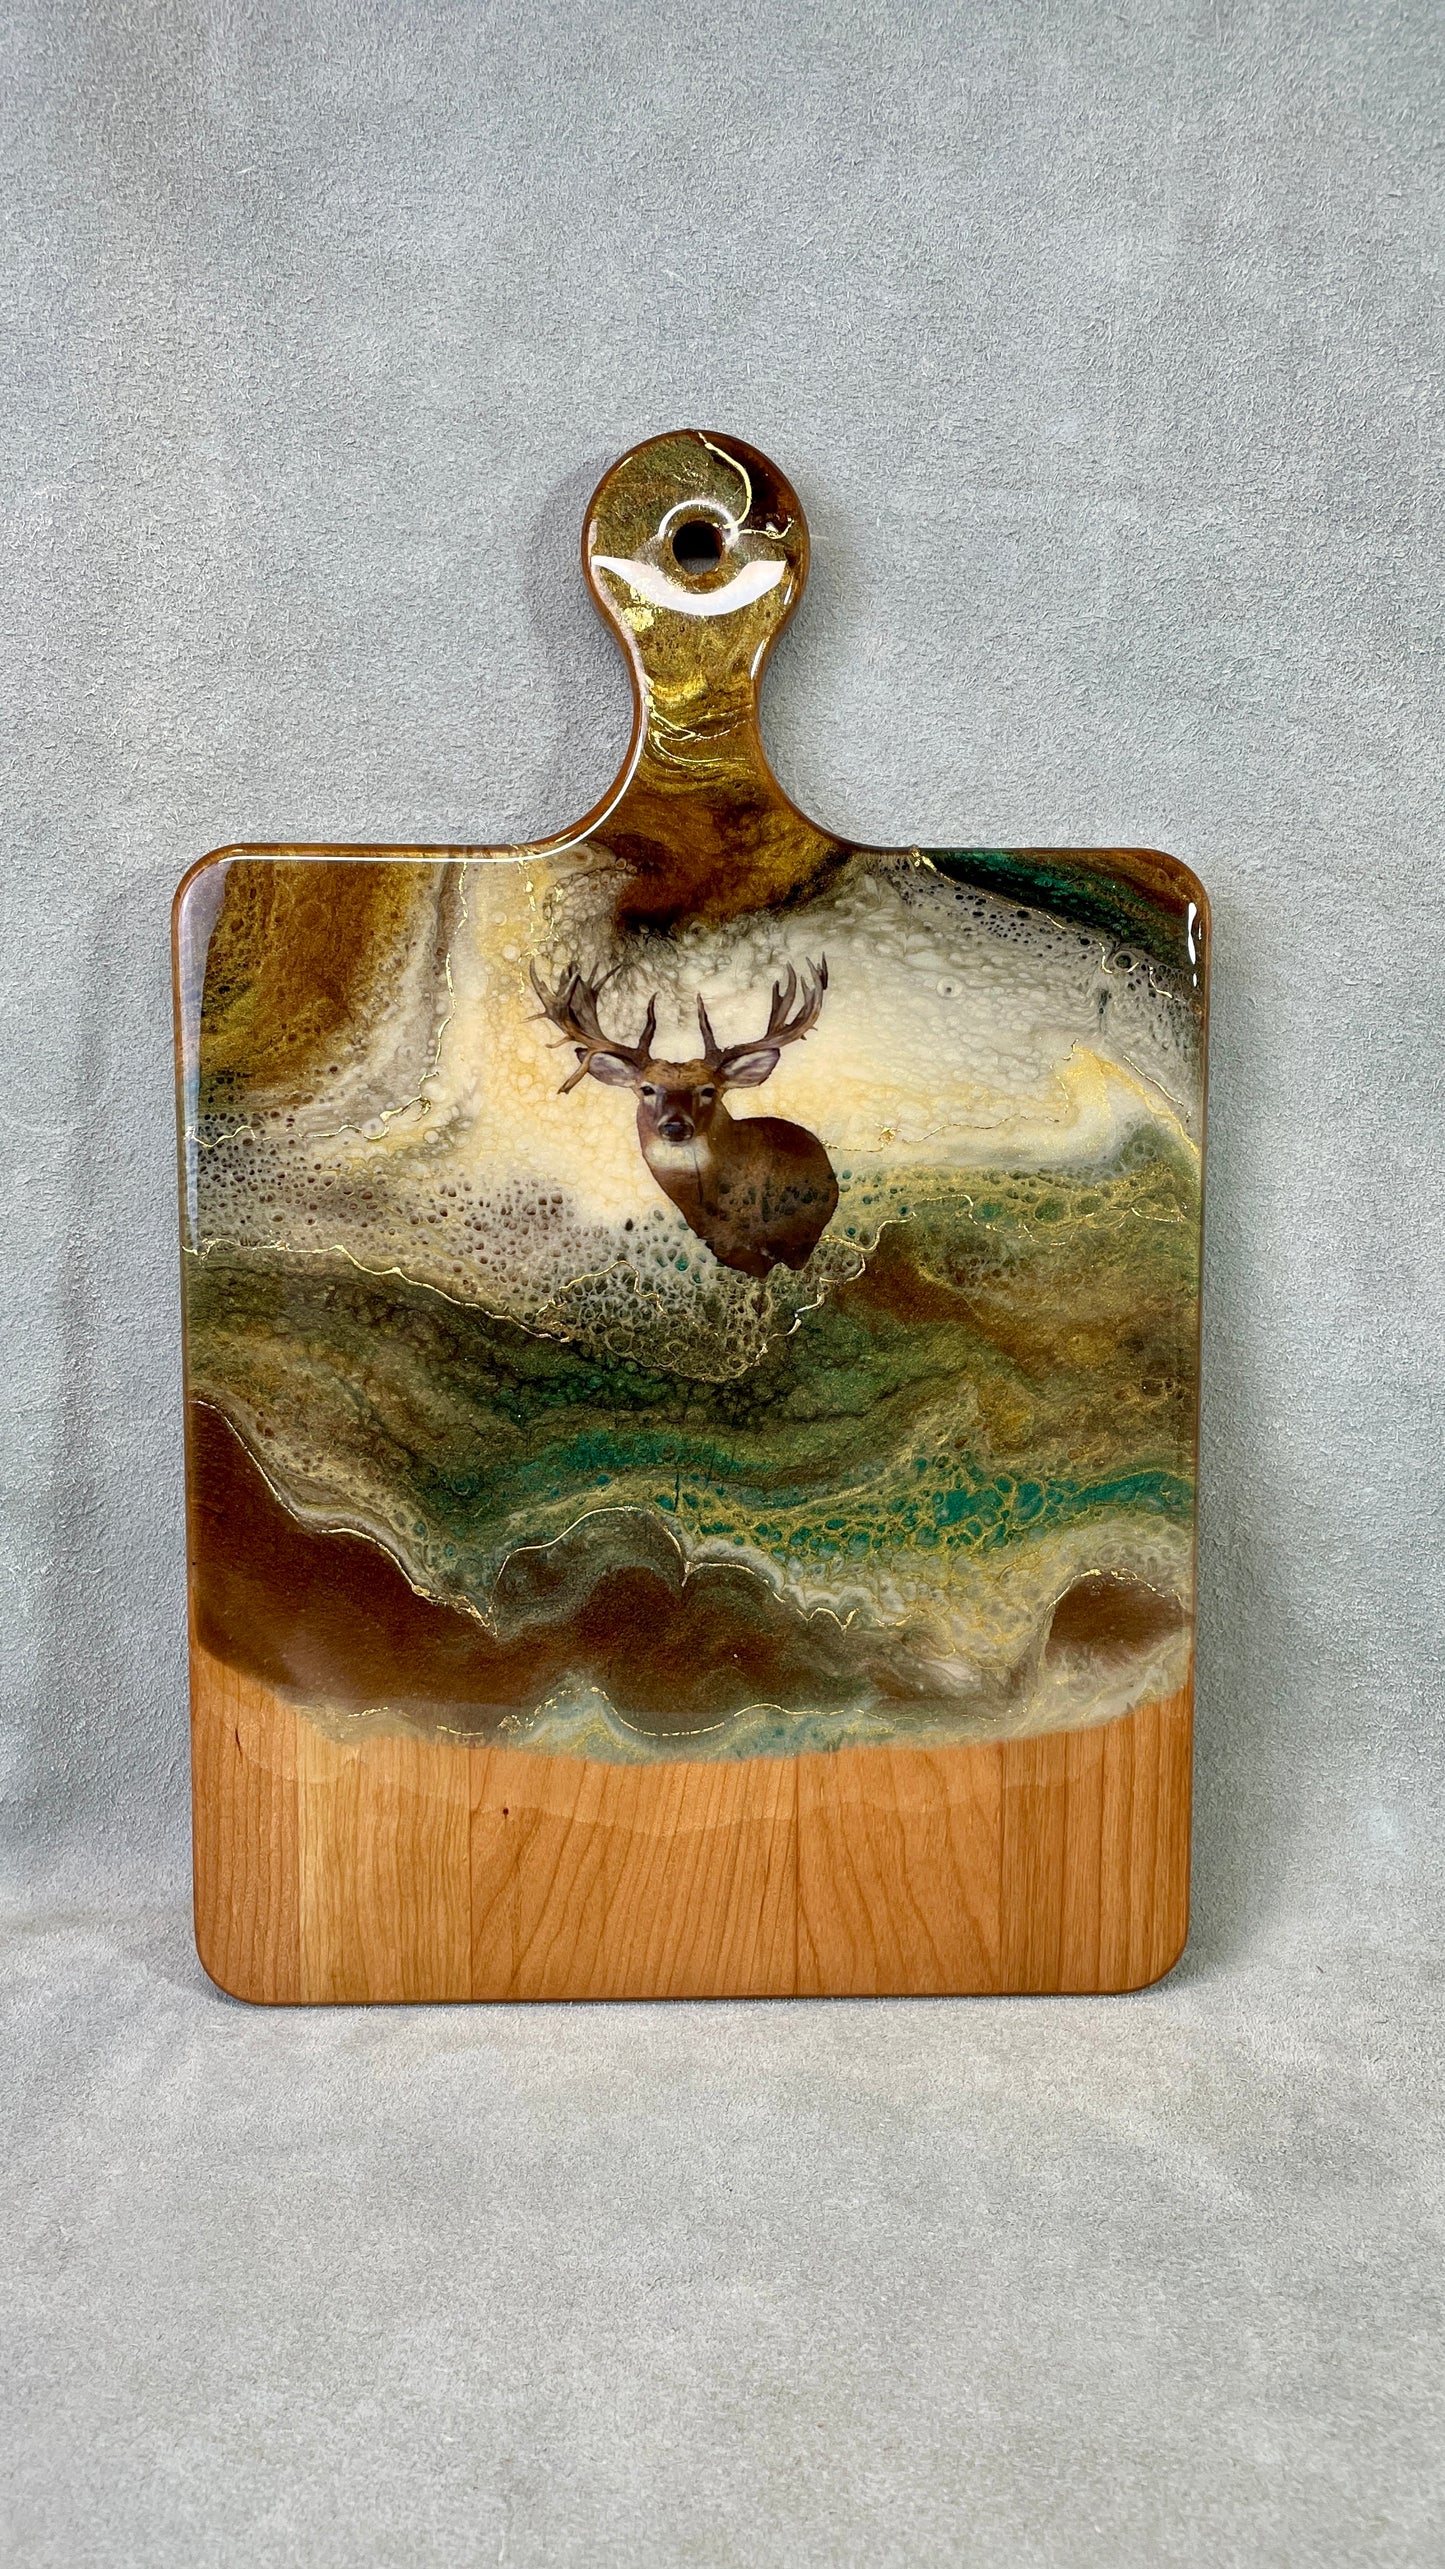 Our wood and resin serving boards offer an easy, unique entertaining solution that is ready to impress from big crowds to intimate gatherings for years to come setting the perfect stage for entertaining or gourmet gifts.  The mulie decal  is  highlighted against an ivory resin background with a swirls of the 24K gold accent within the layers of resin